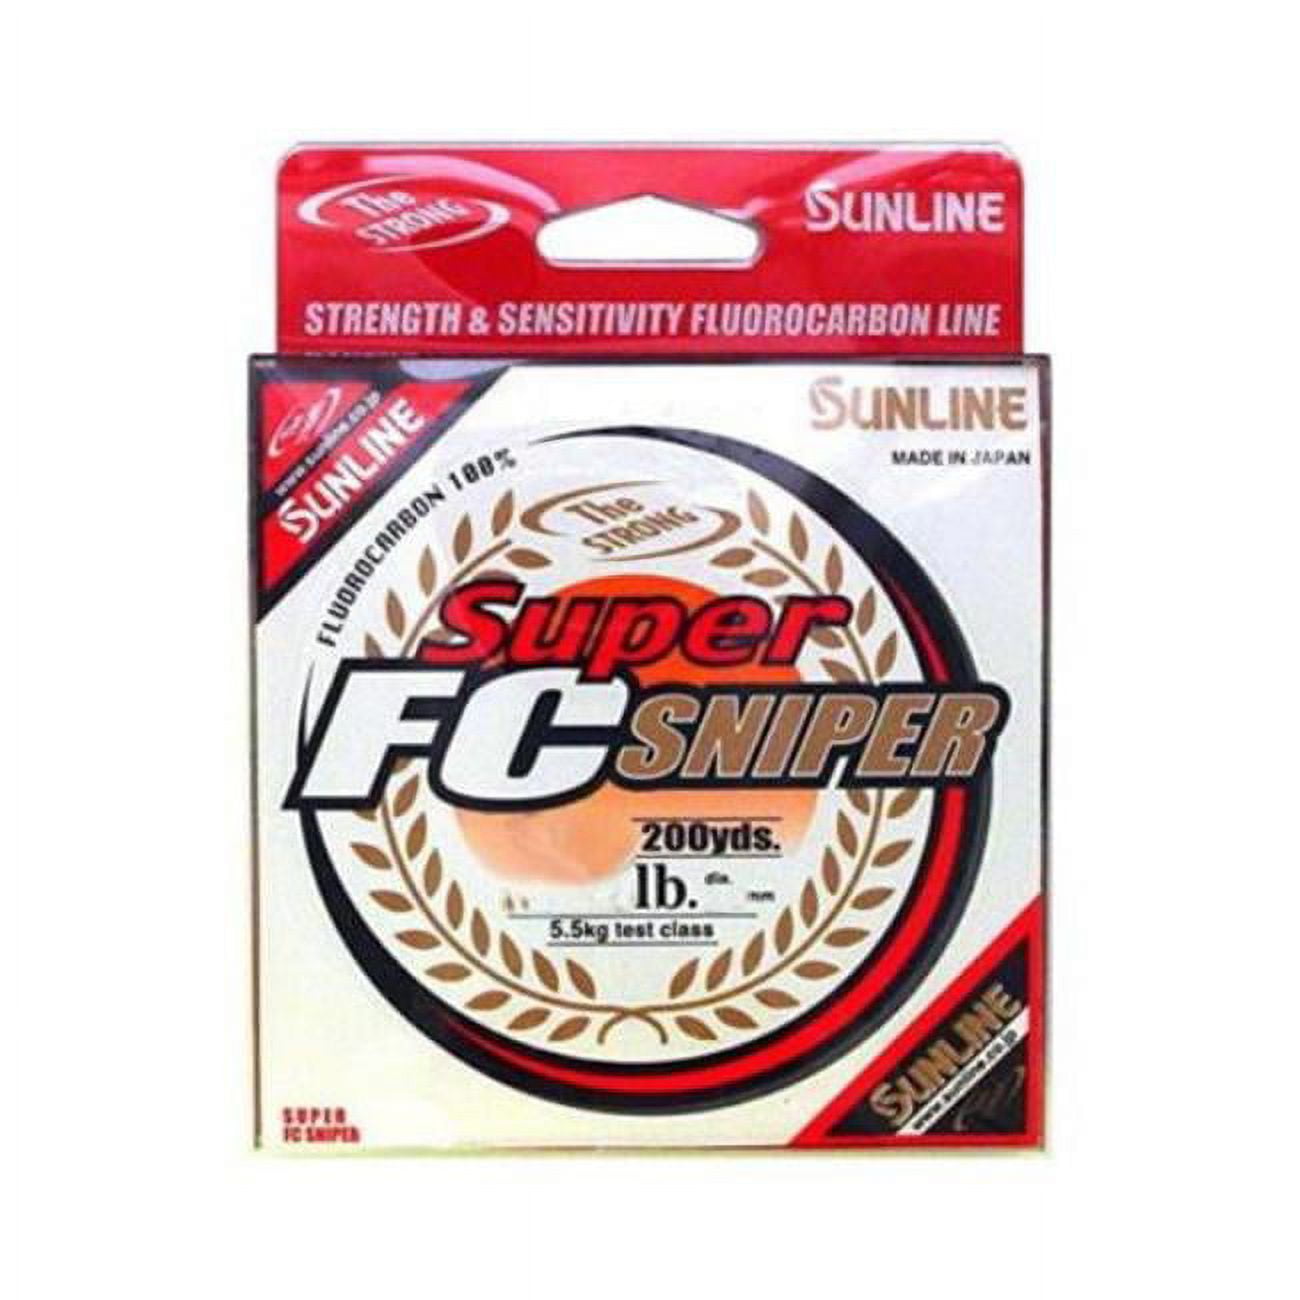 Sunline 63038946 12 lbs Super FC Sniper Fluorocarbon Fishing Line, Natural  Clear - 1200 yards 